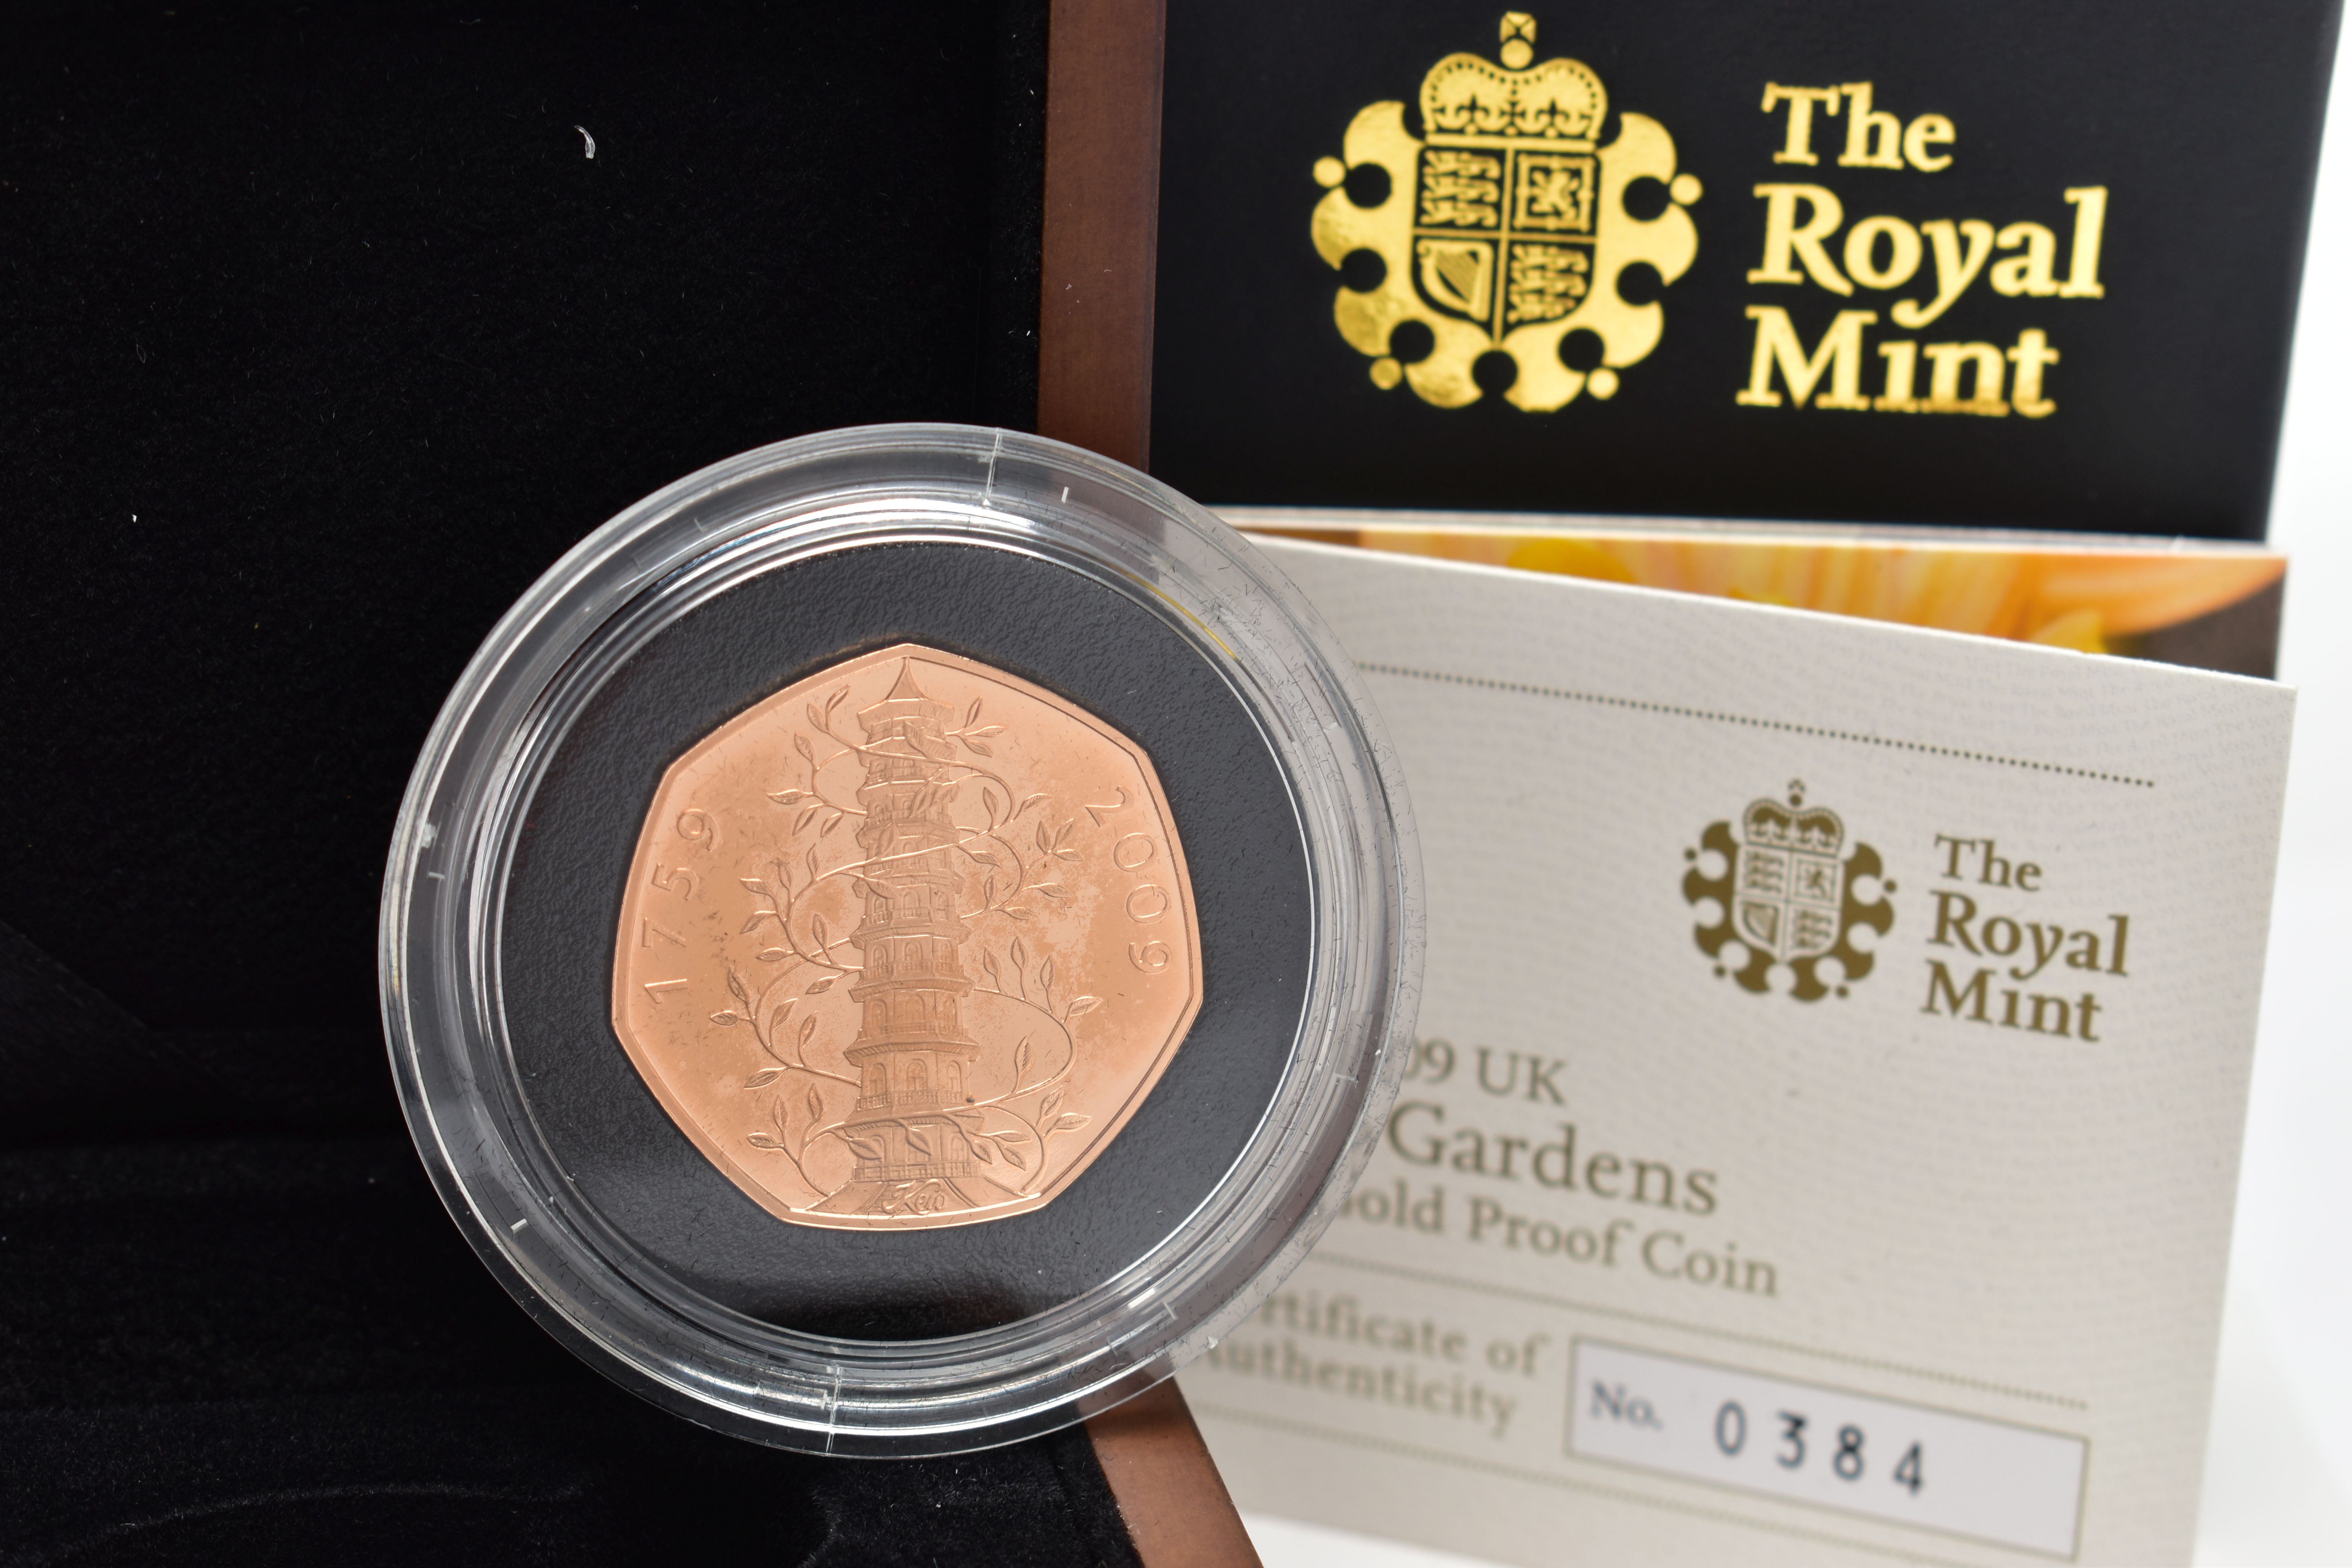 A ROYAL MINT 2009 UNITED KINGDOM GOLD PROOF 'KEW GARDENS' 50P COIN, 15.50 grams, 27.30mm, issue